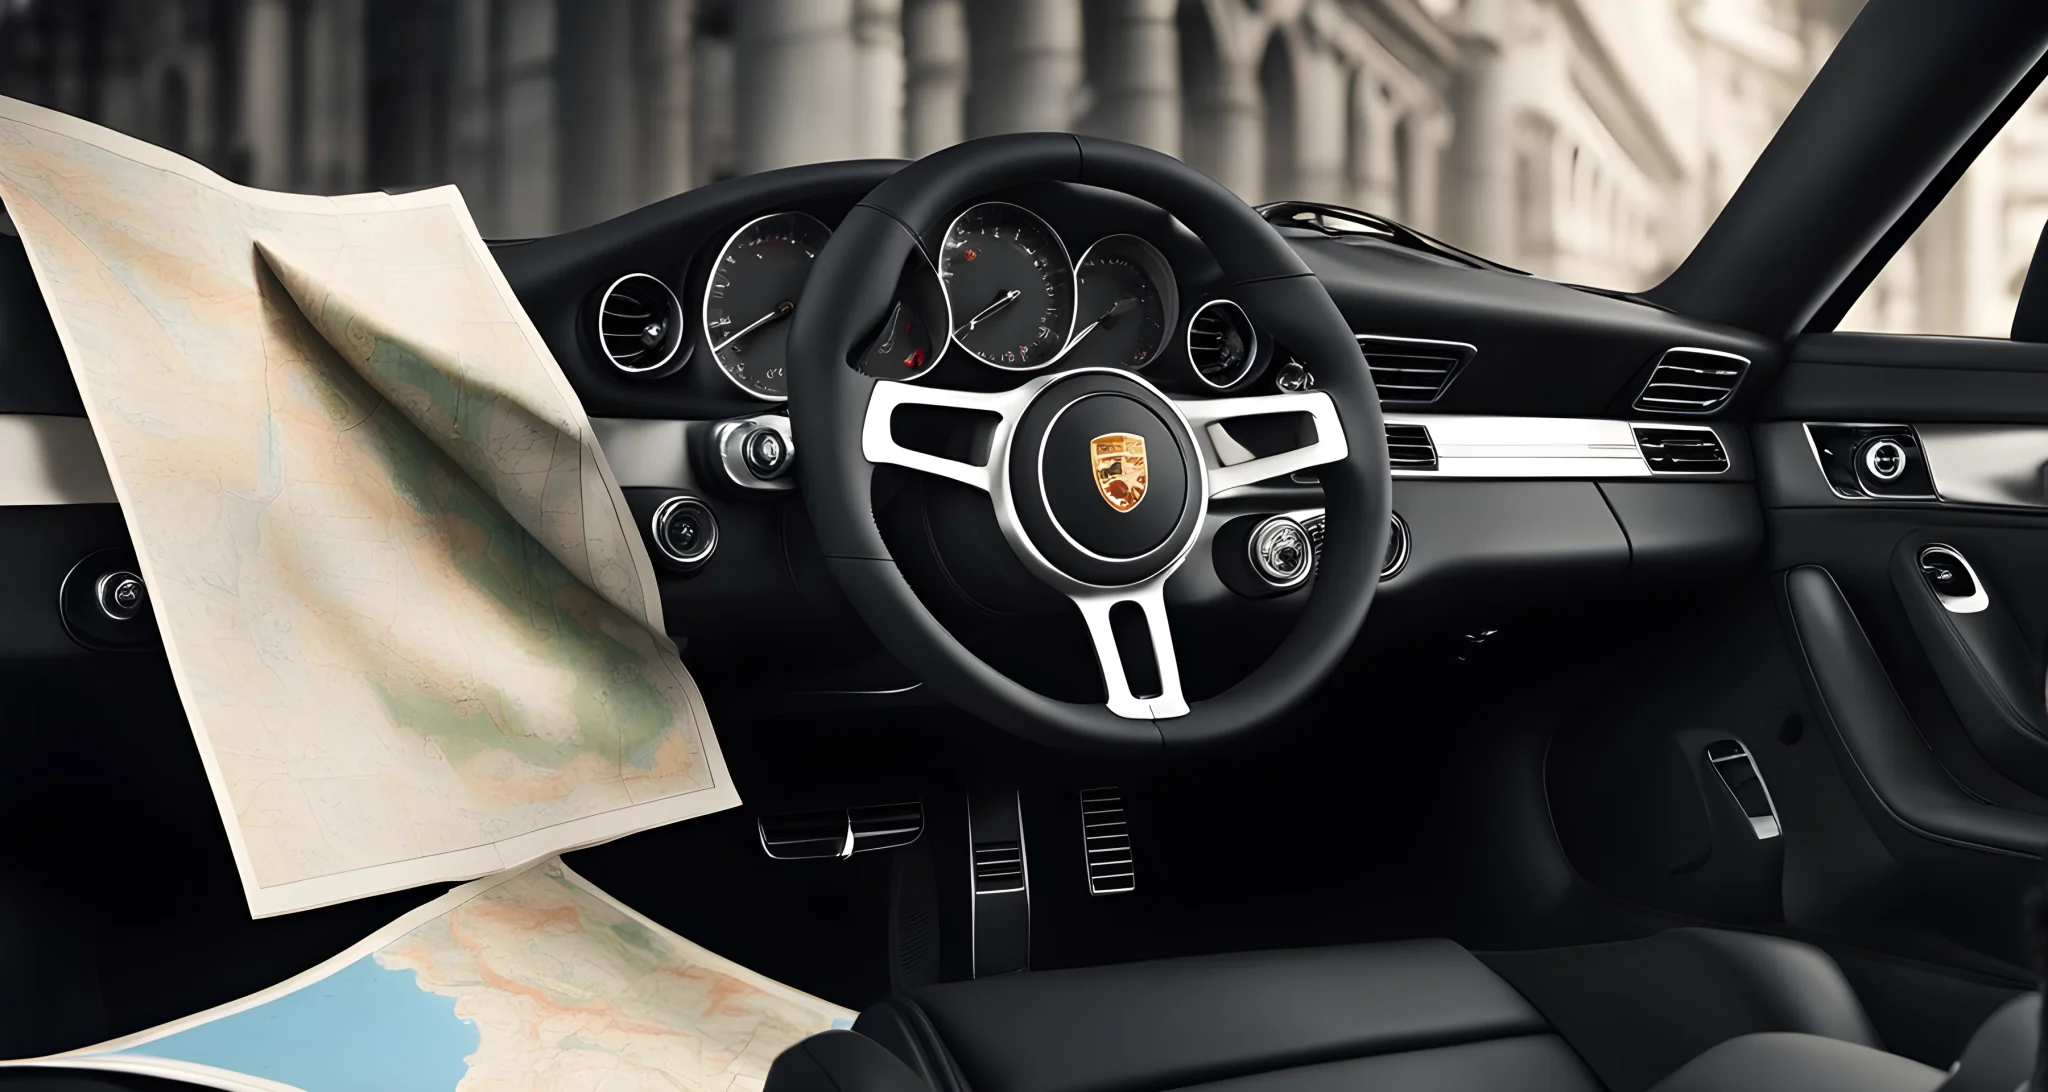 The image shows a black Porsche sports car packed with luggage and a map on the dashboard.